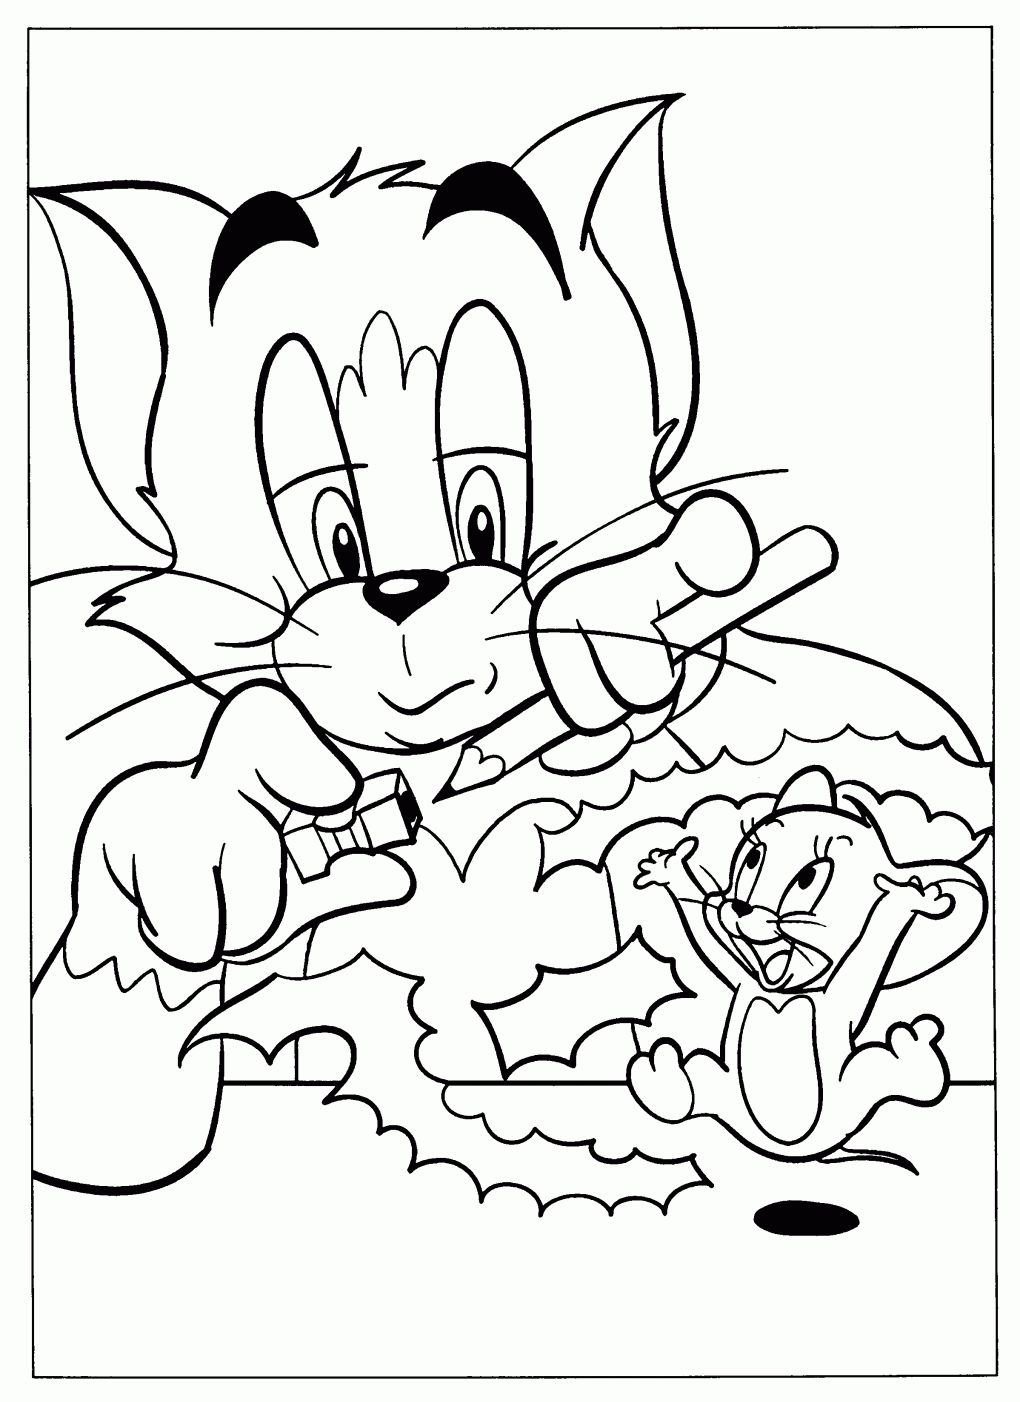 Tom Jerry Coloring Page Coloring Books Disney Coloring Pages Tom And Jerry Pictures